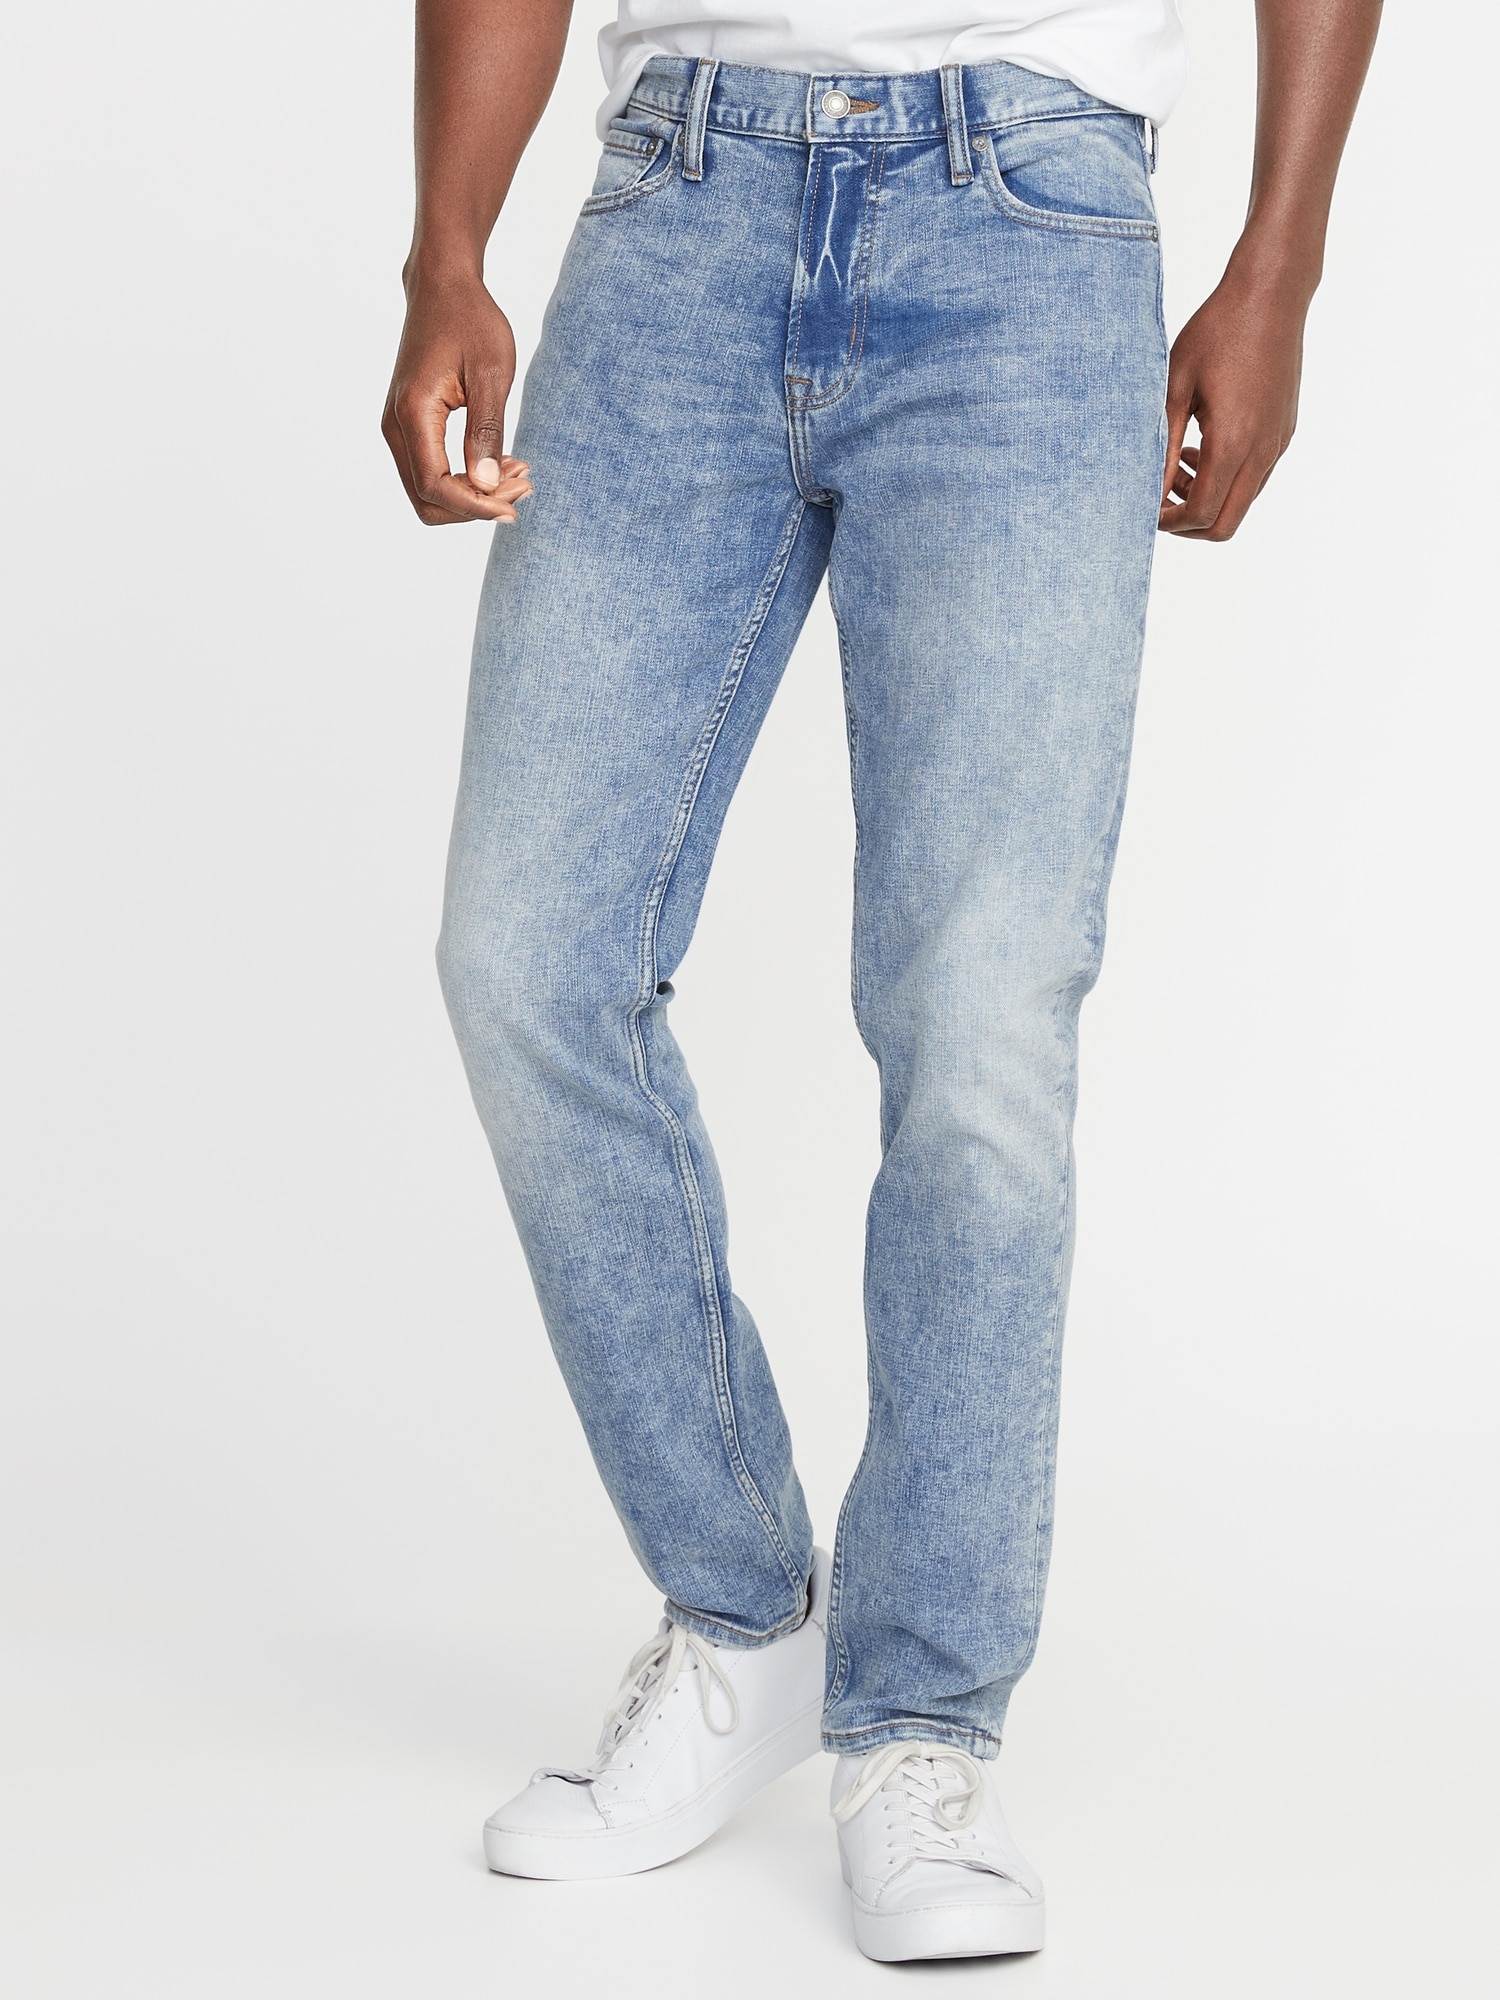 Relaxed Slim Built-In Flex All-Temp Jeans | Old Navy